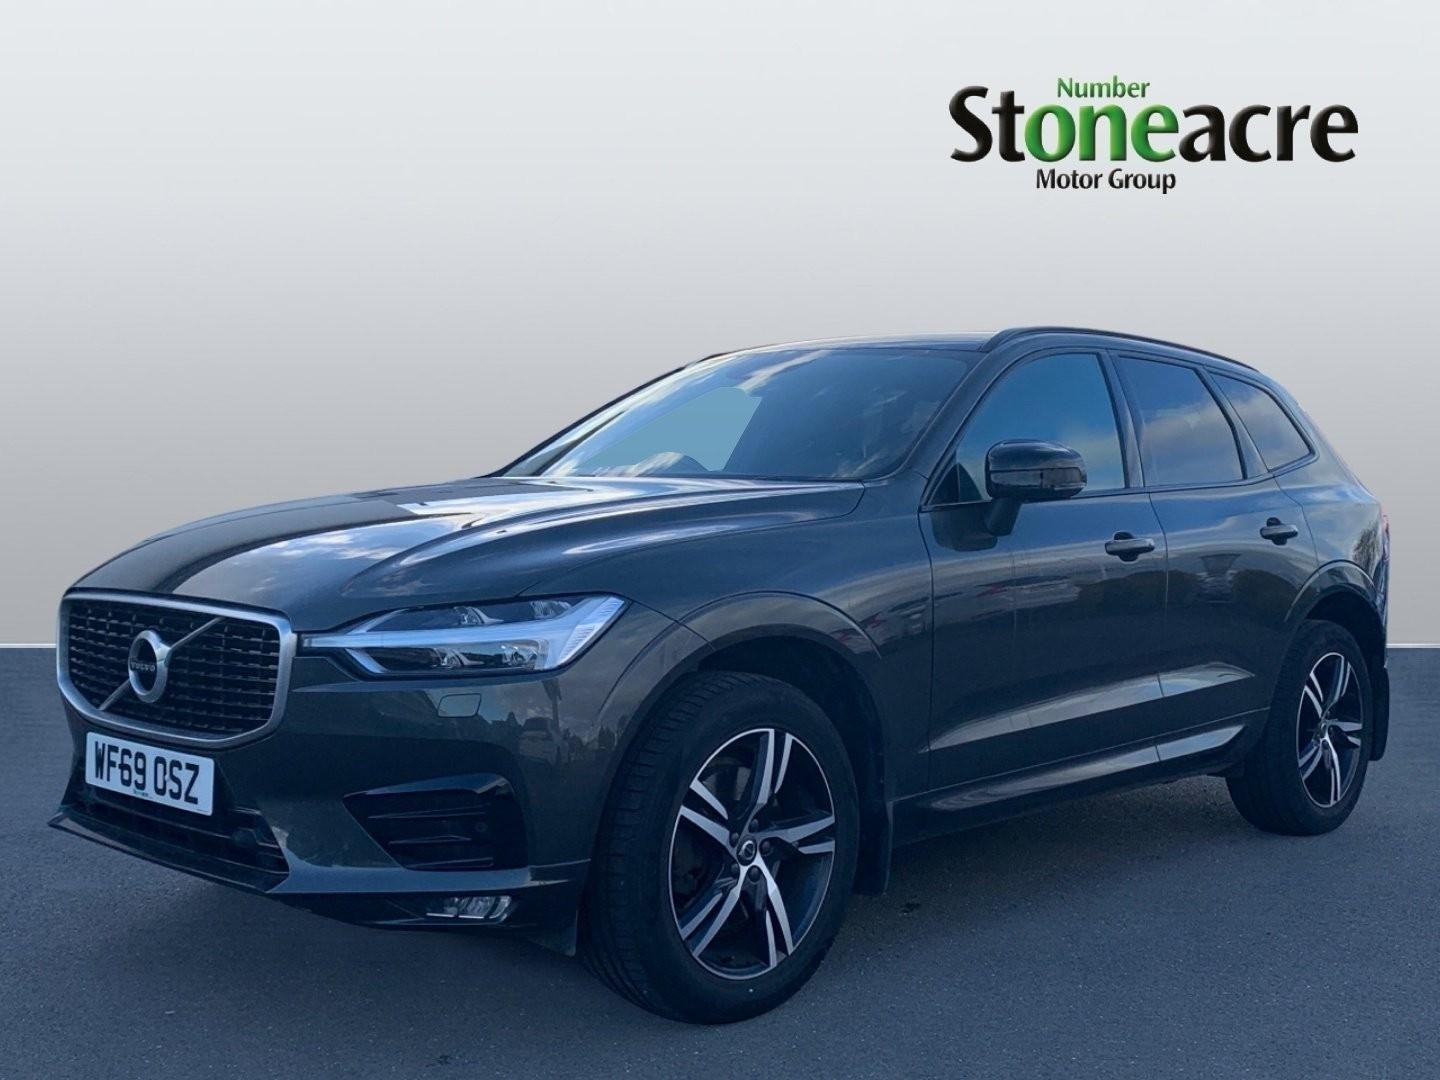 Volvo XC60 2.0 T5 [250] R DESIGN 5dr AWD Geartronic (WF69OSZ) image 5